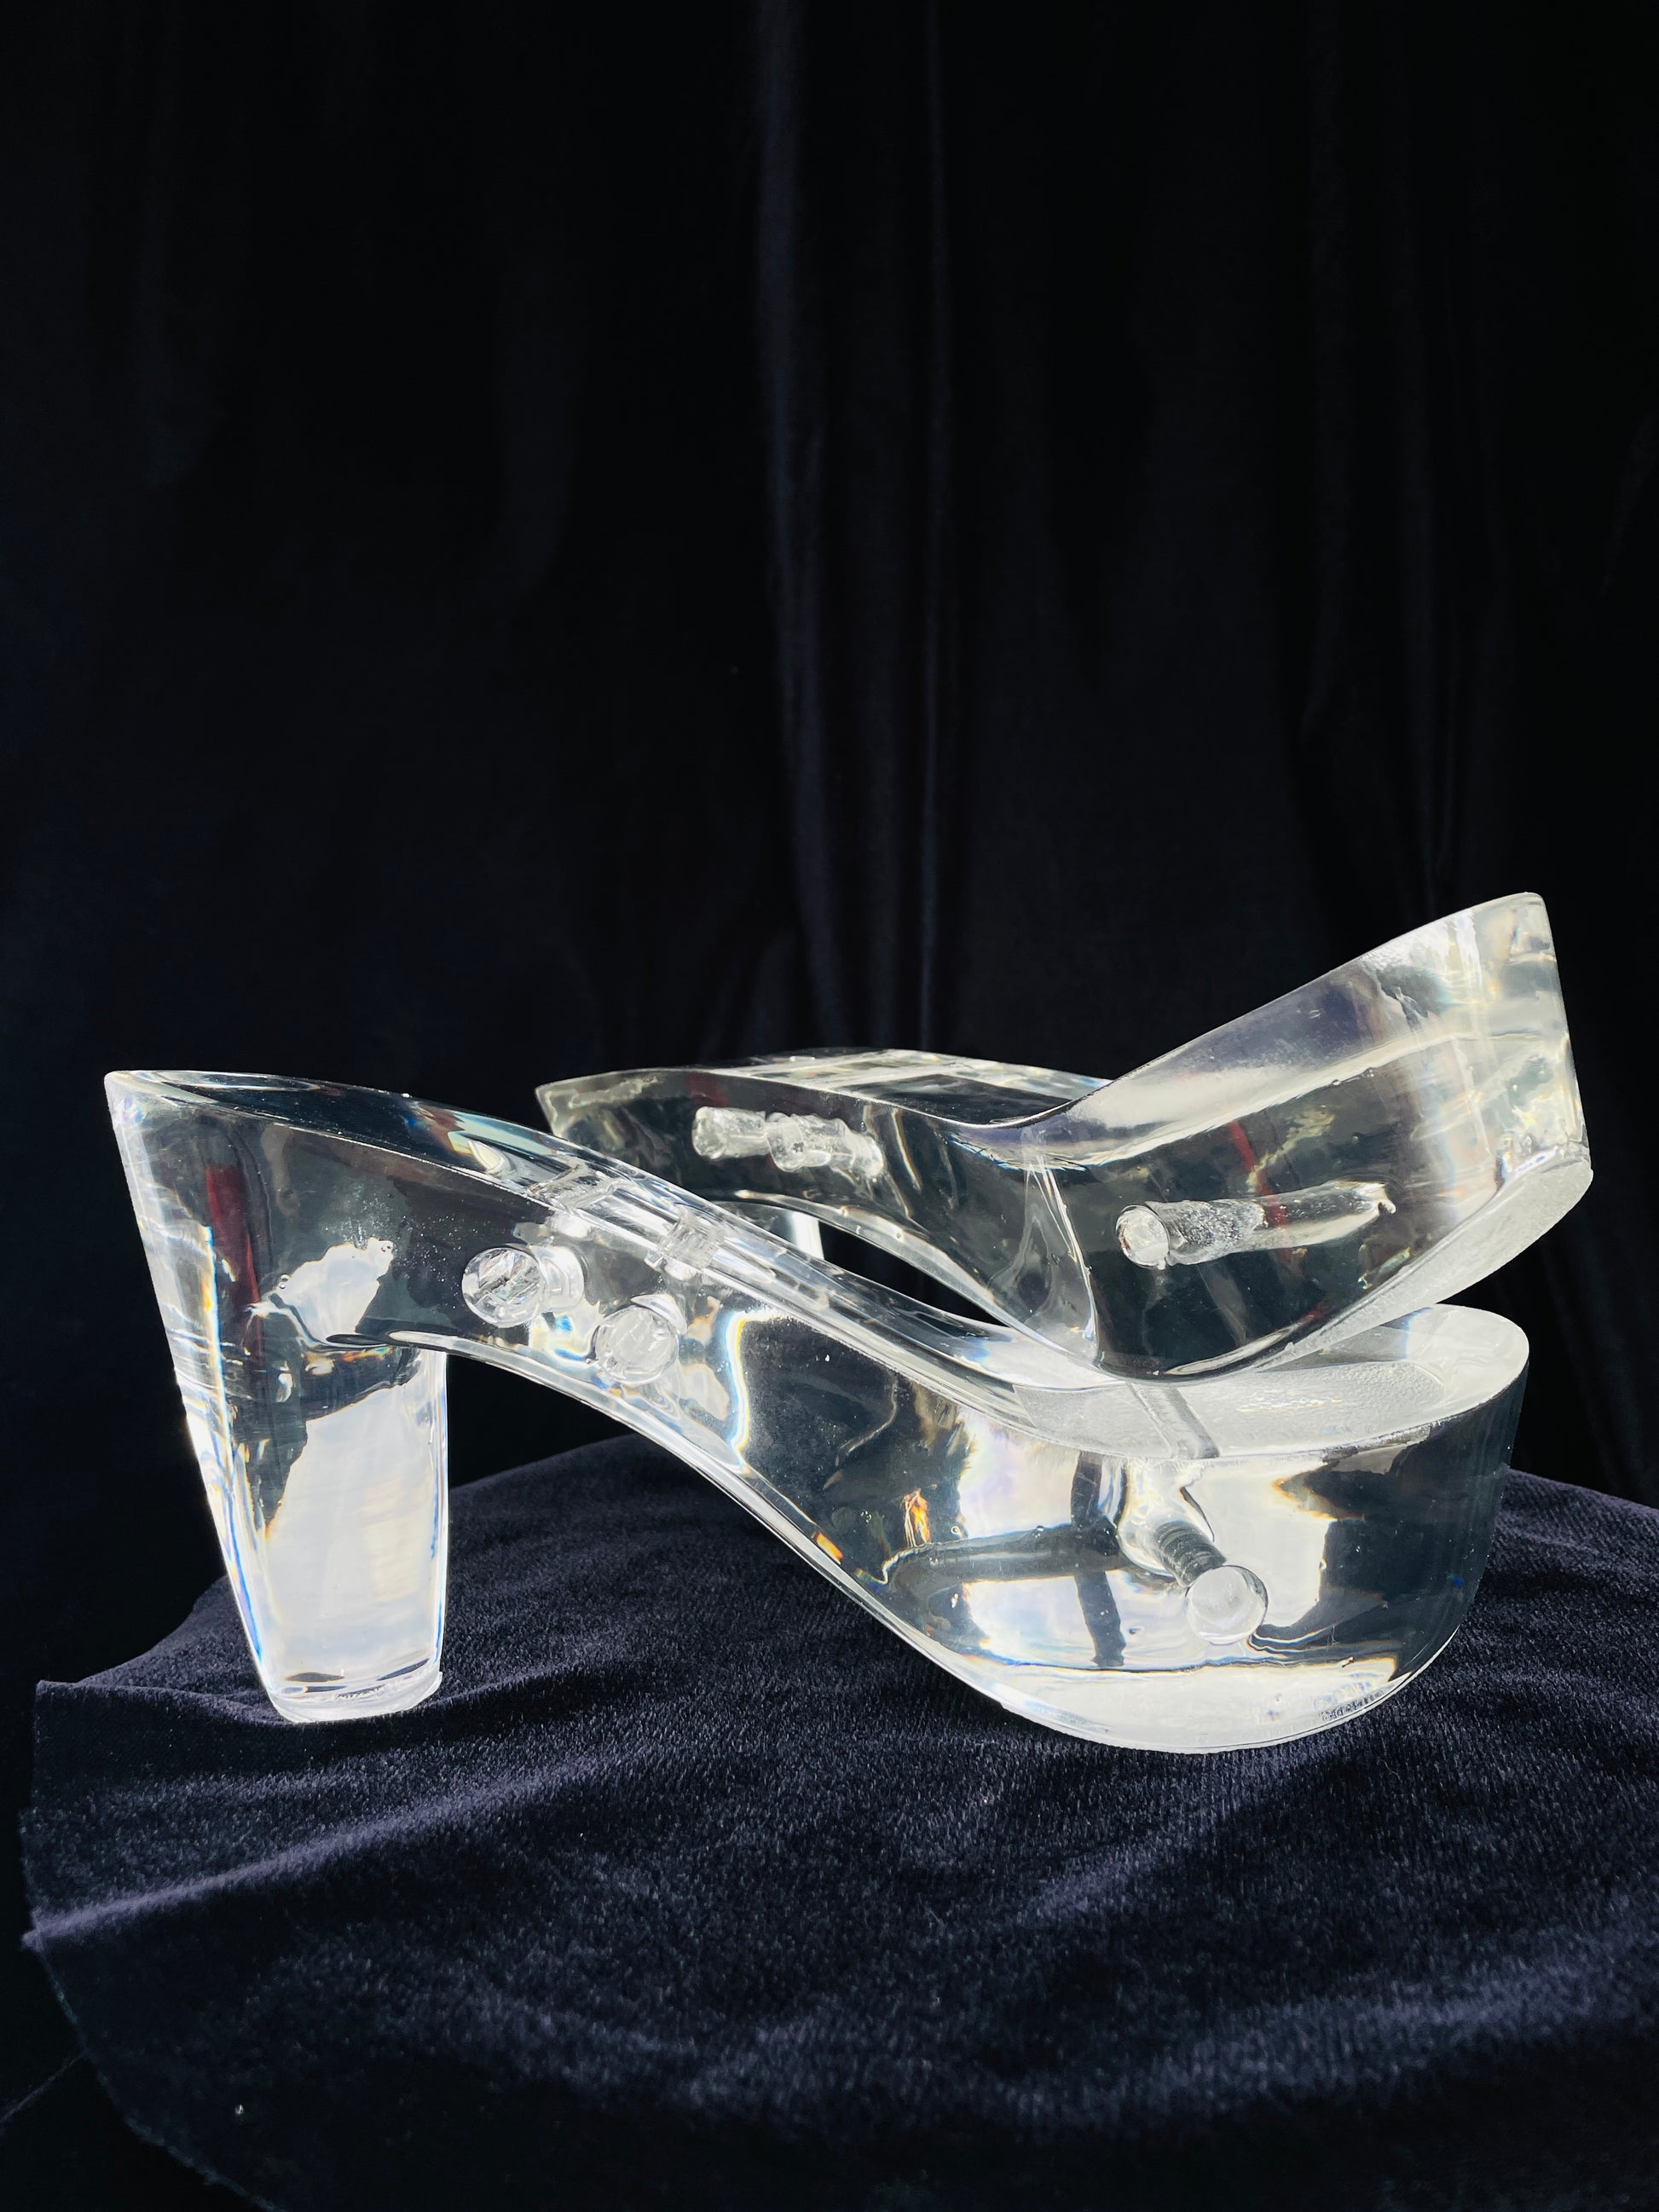 Recreation of Marilyn Monroe's Clear Platform Heel "Cinderella Slippers" hand made from epoxy resin. These are literally art you wear on your tootsies made in Auburndale, Florida